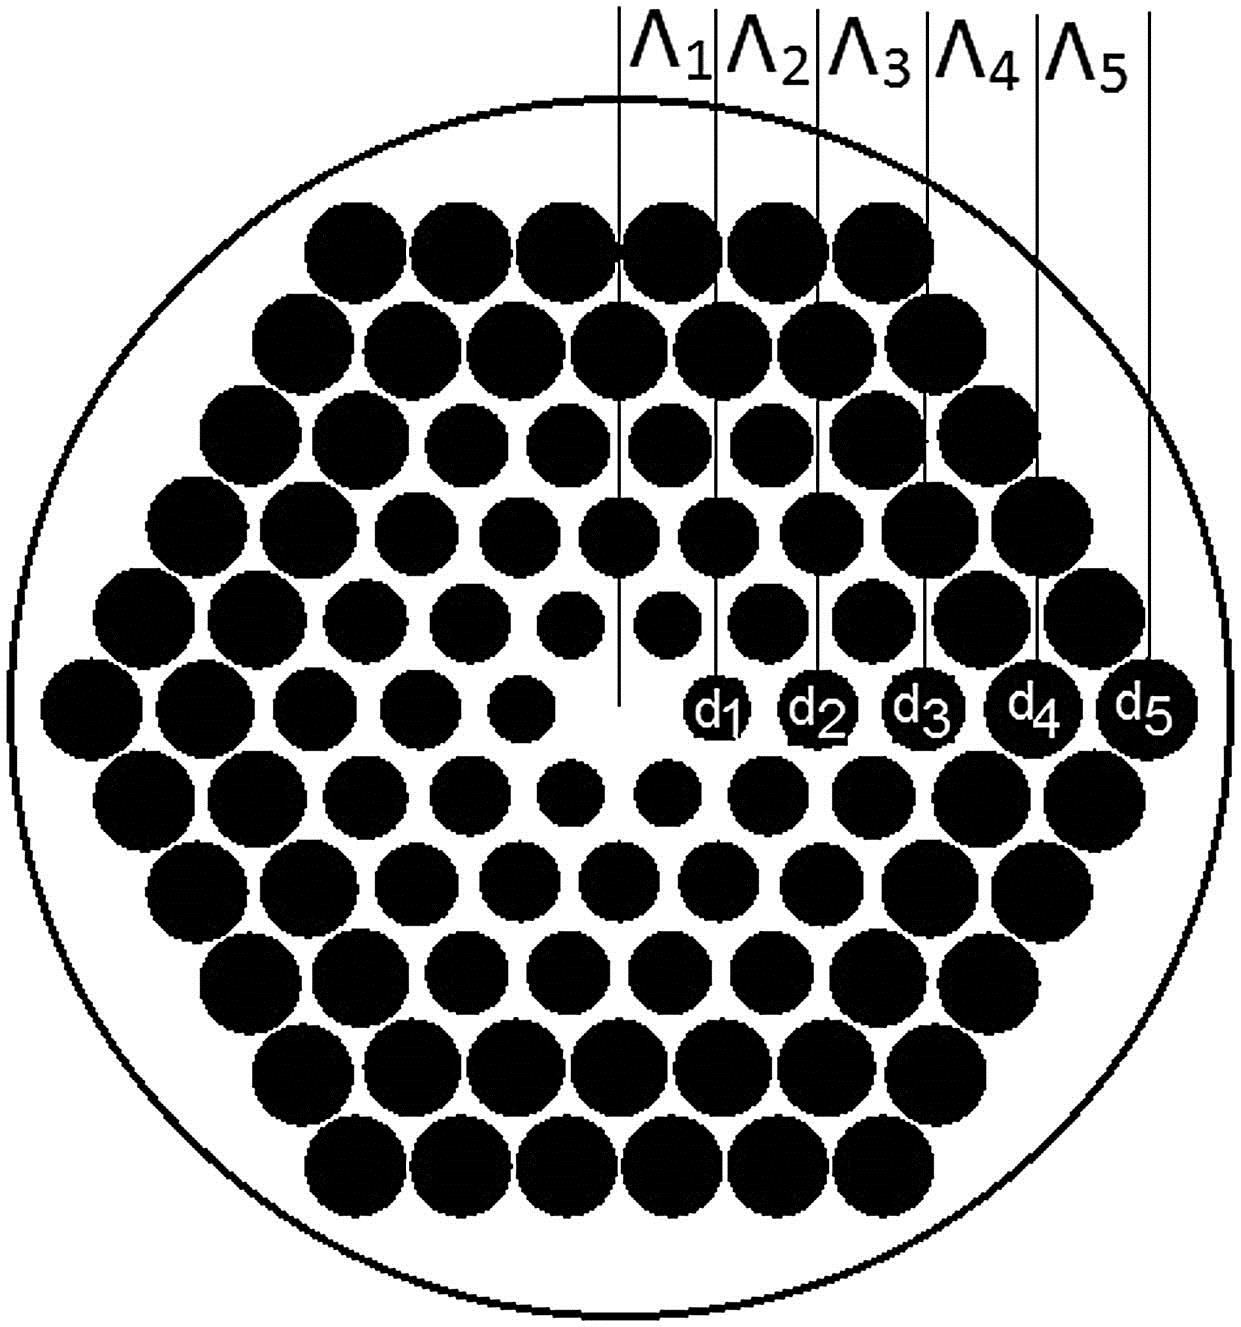 Structure of the hexagonal PCF.